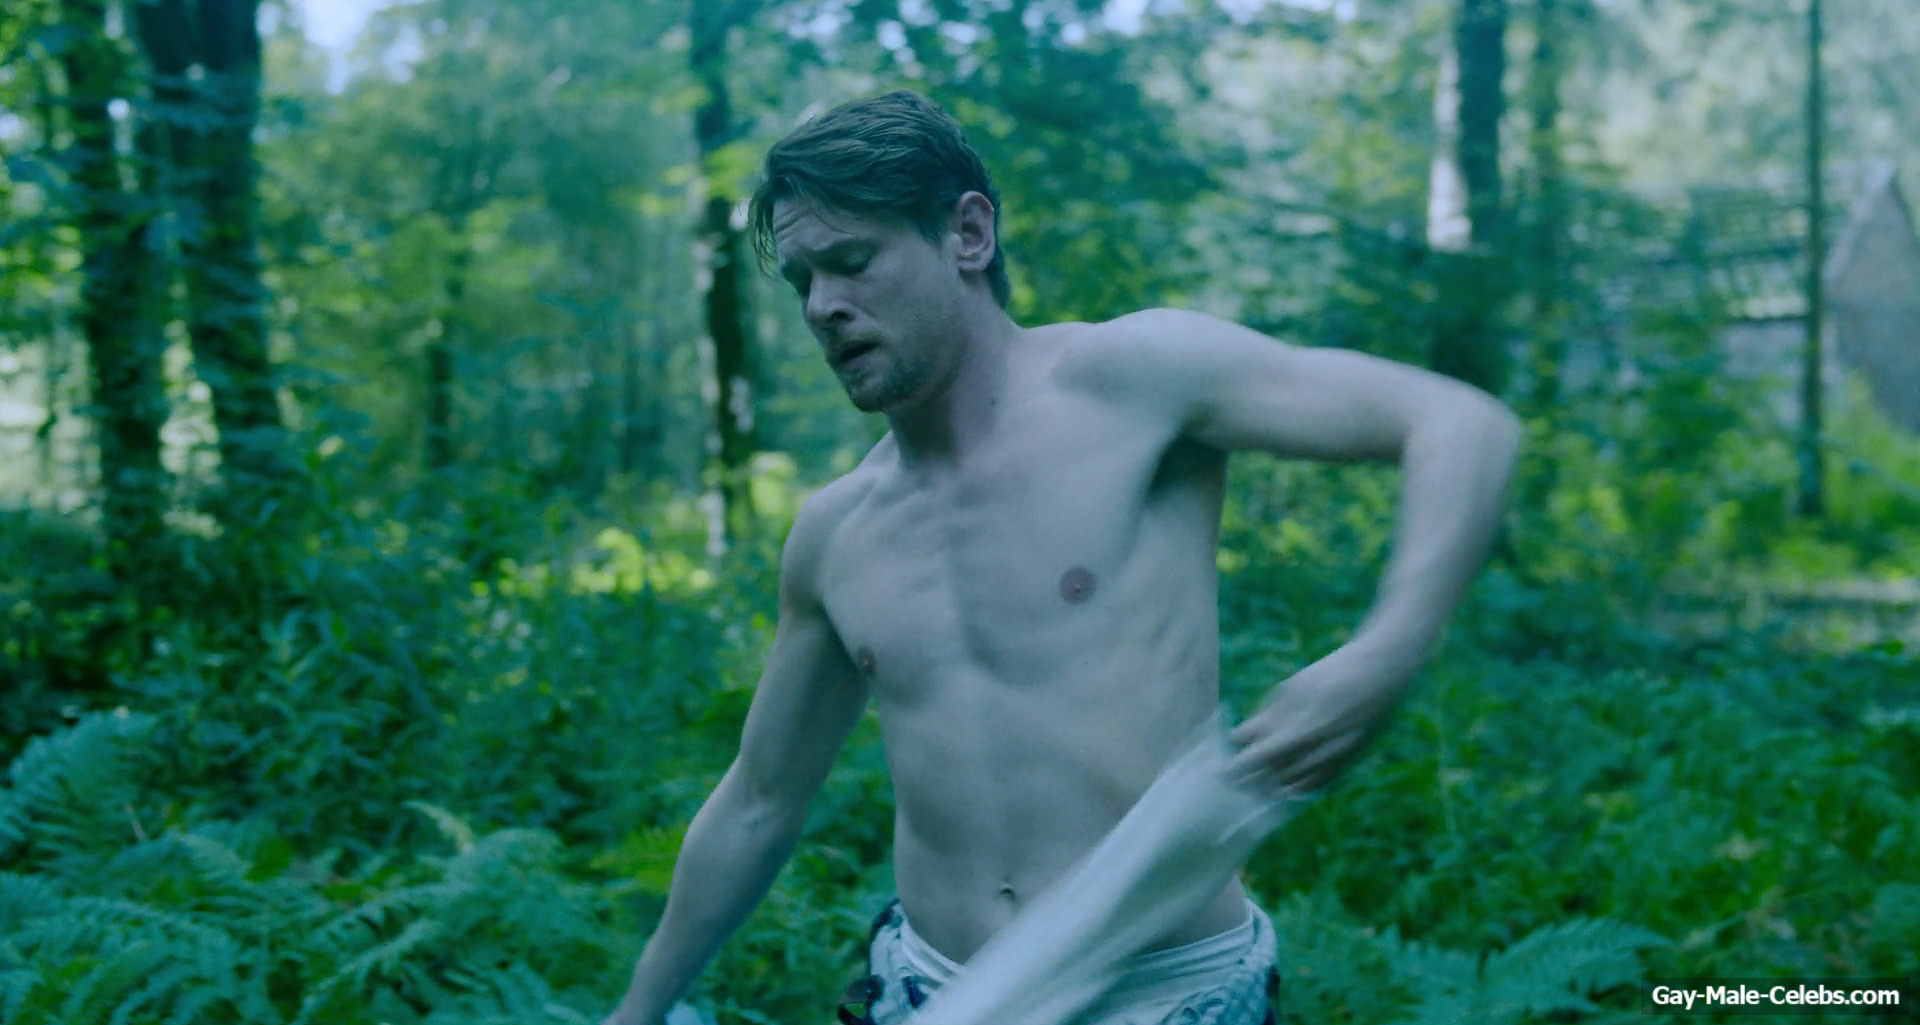 Jack O’Connell Nude Cock Scenes in Lady Chatterley’s Lover